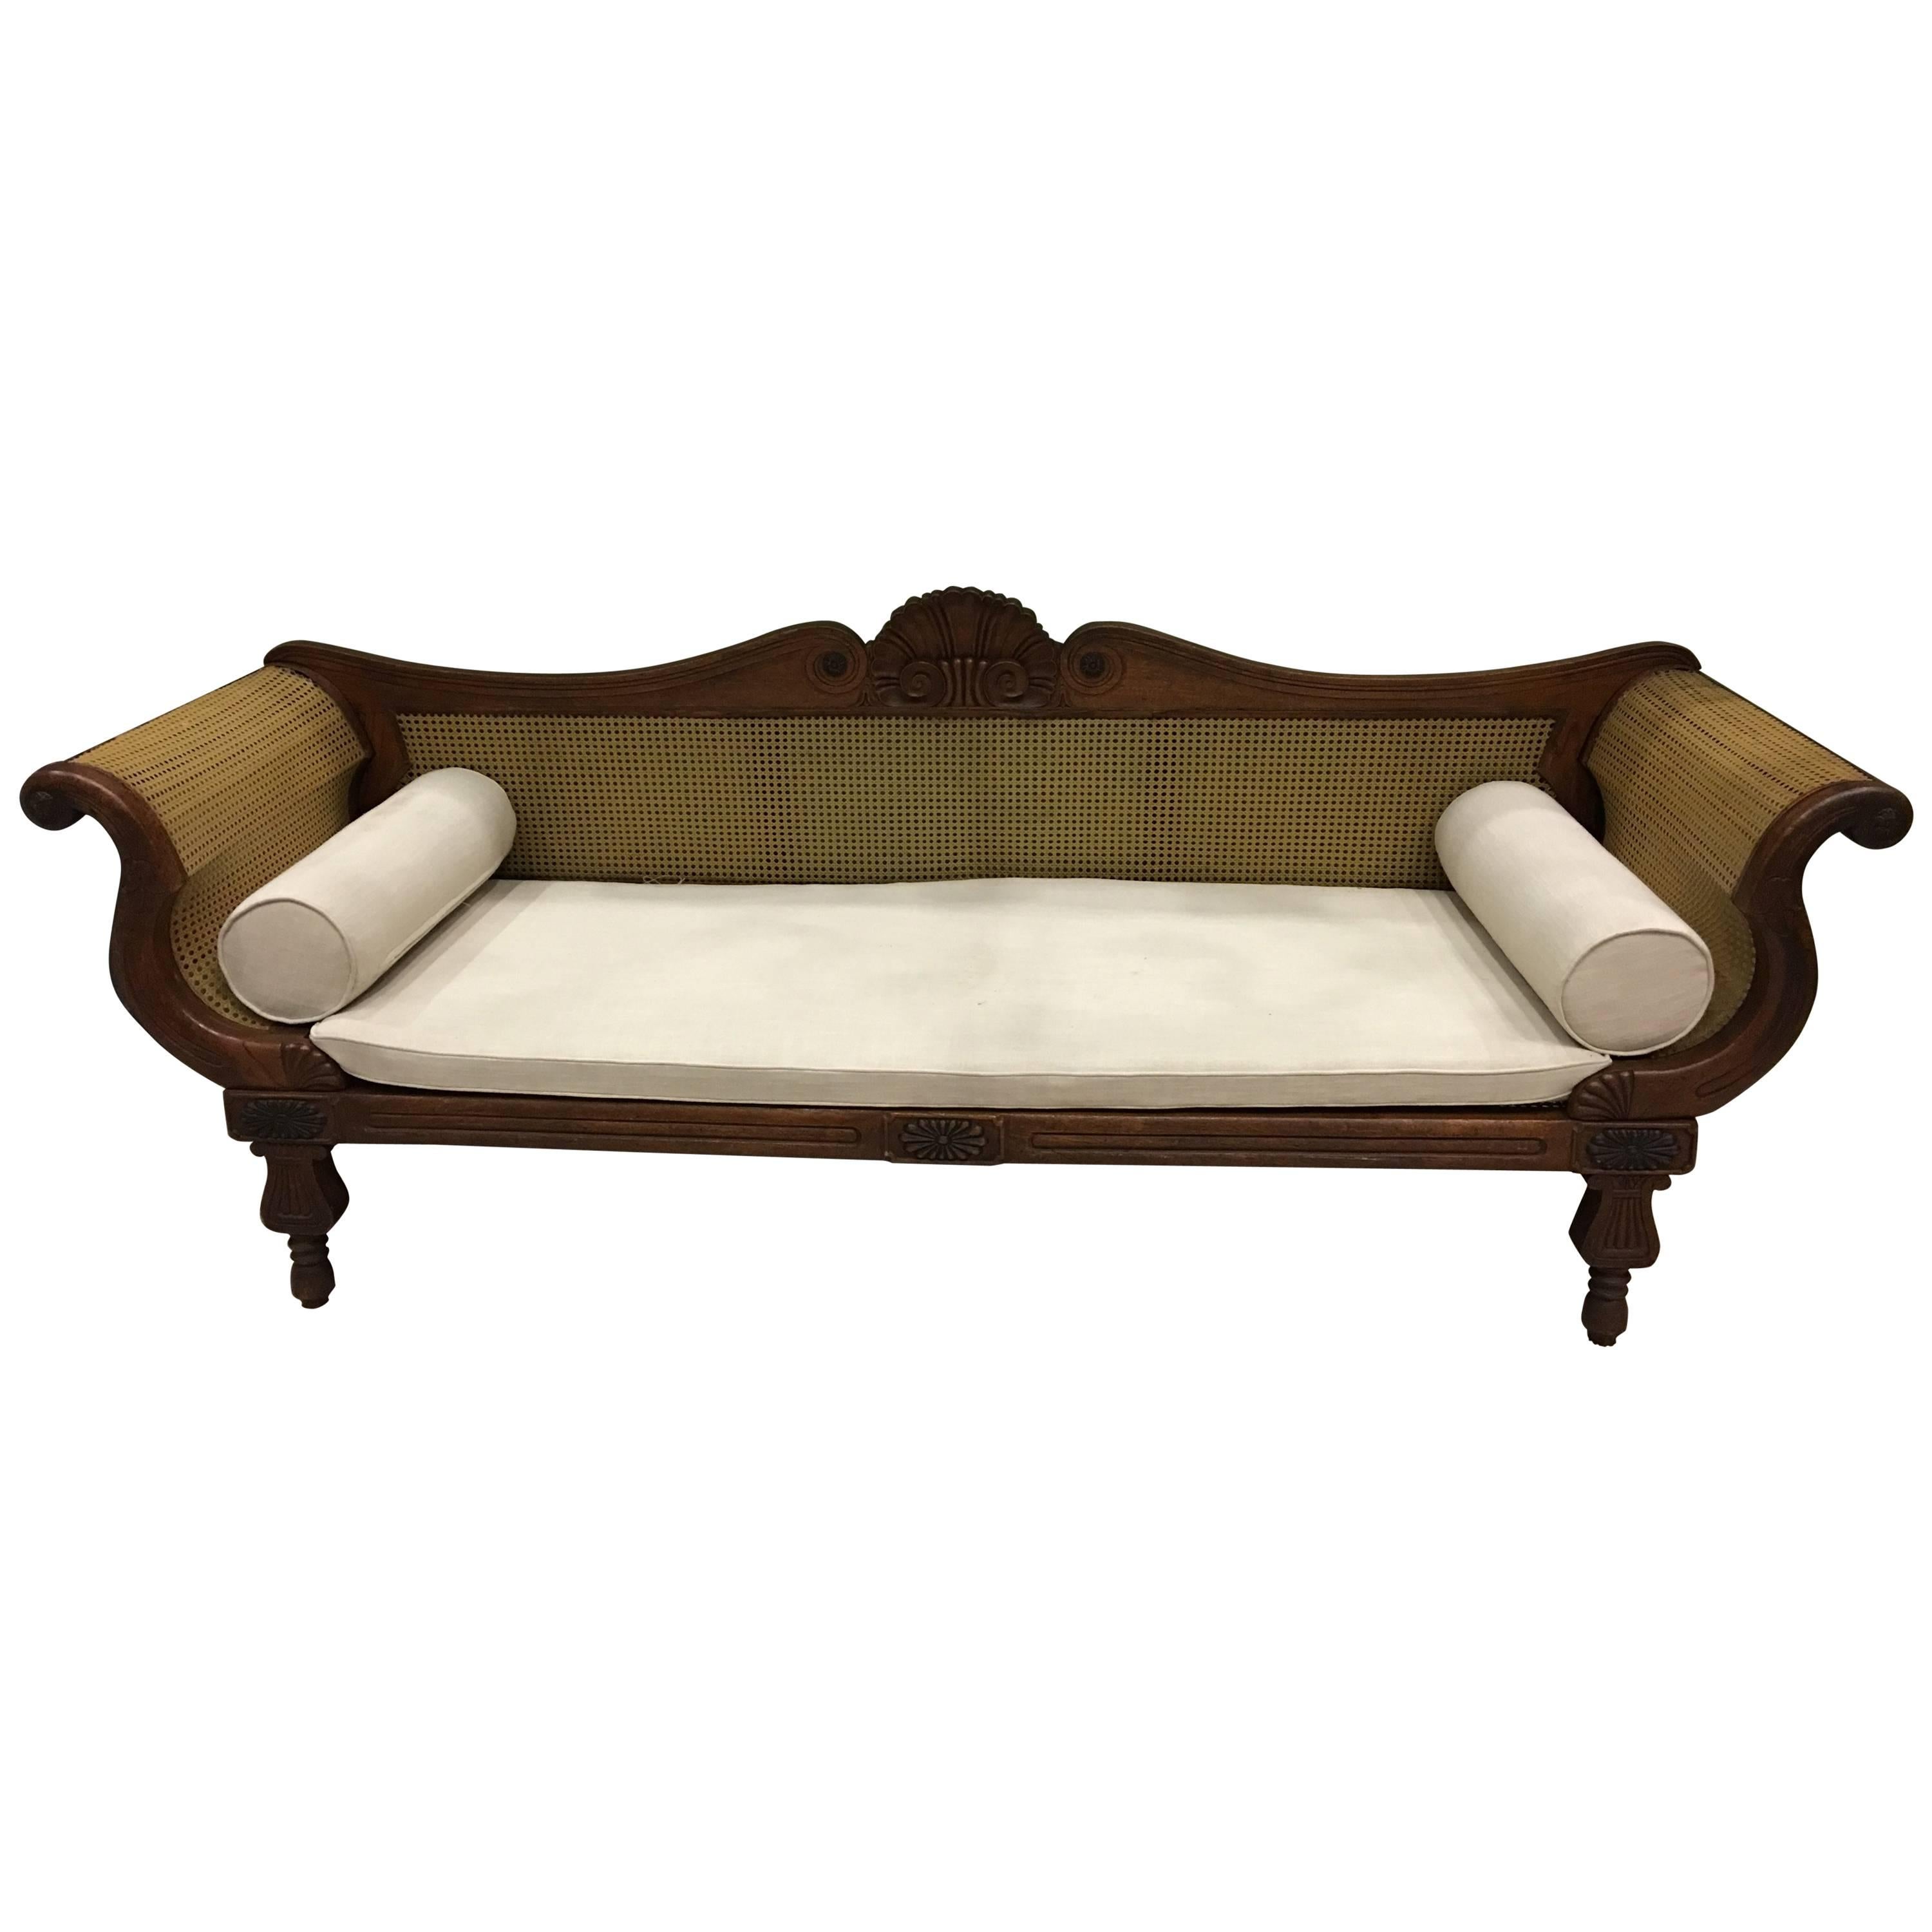 West Indian Cane Settee, circa 1840